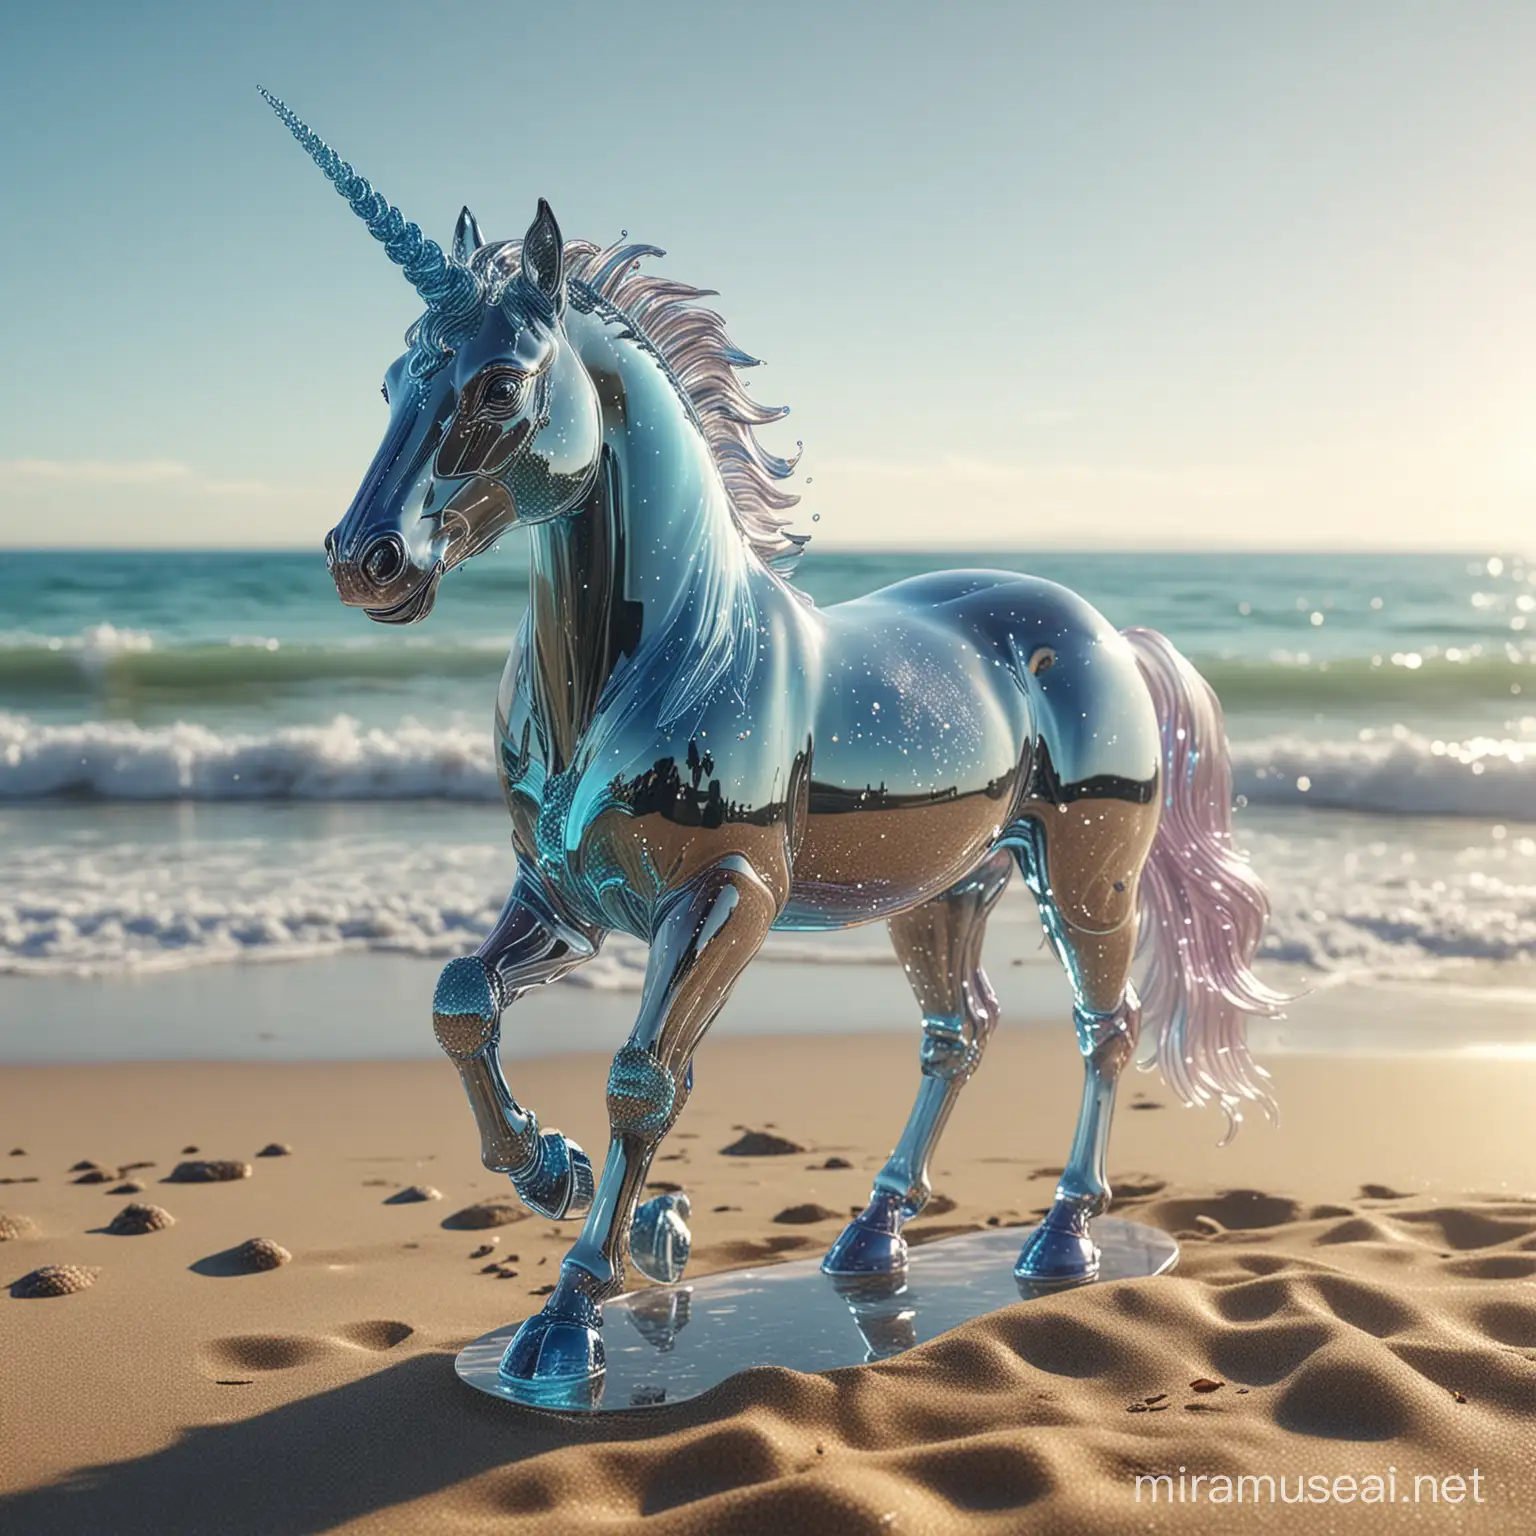 It is a transparent 3D glass unicorn and the background is by the beach and excellent quality 8K Ultra HD 